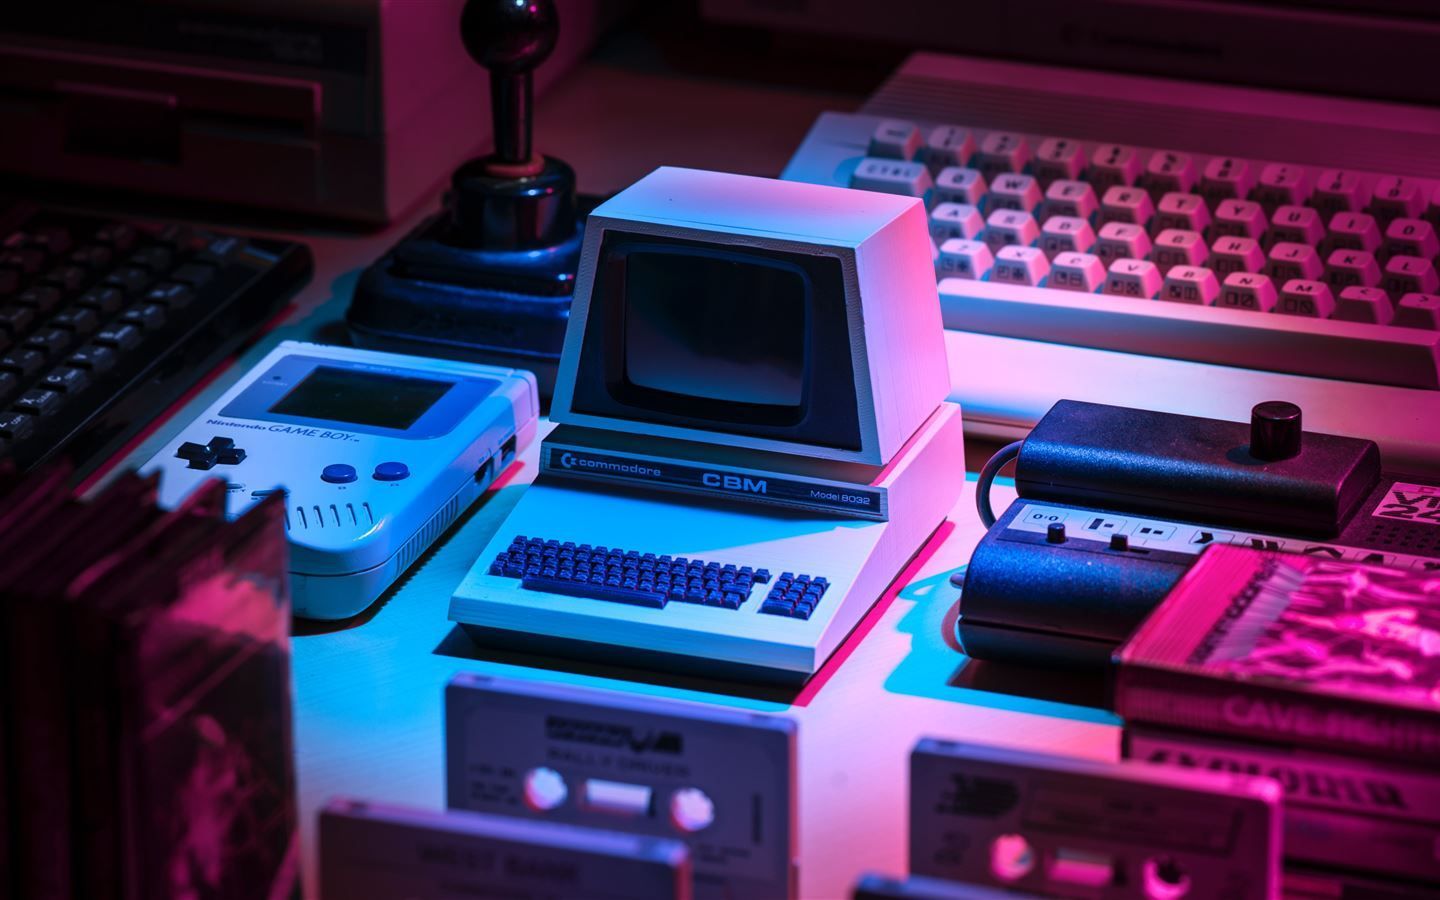 A collection of old computer hardware, including a keyboard, monitor, and game console, is lit up in blue and pink light. - 1440x900